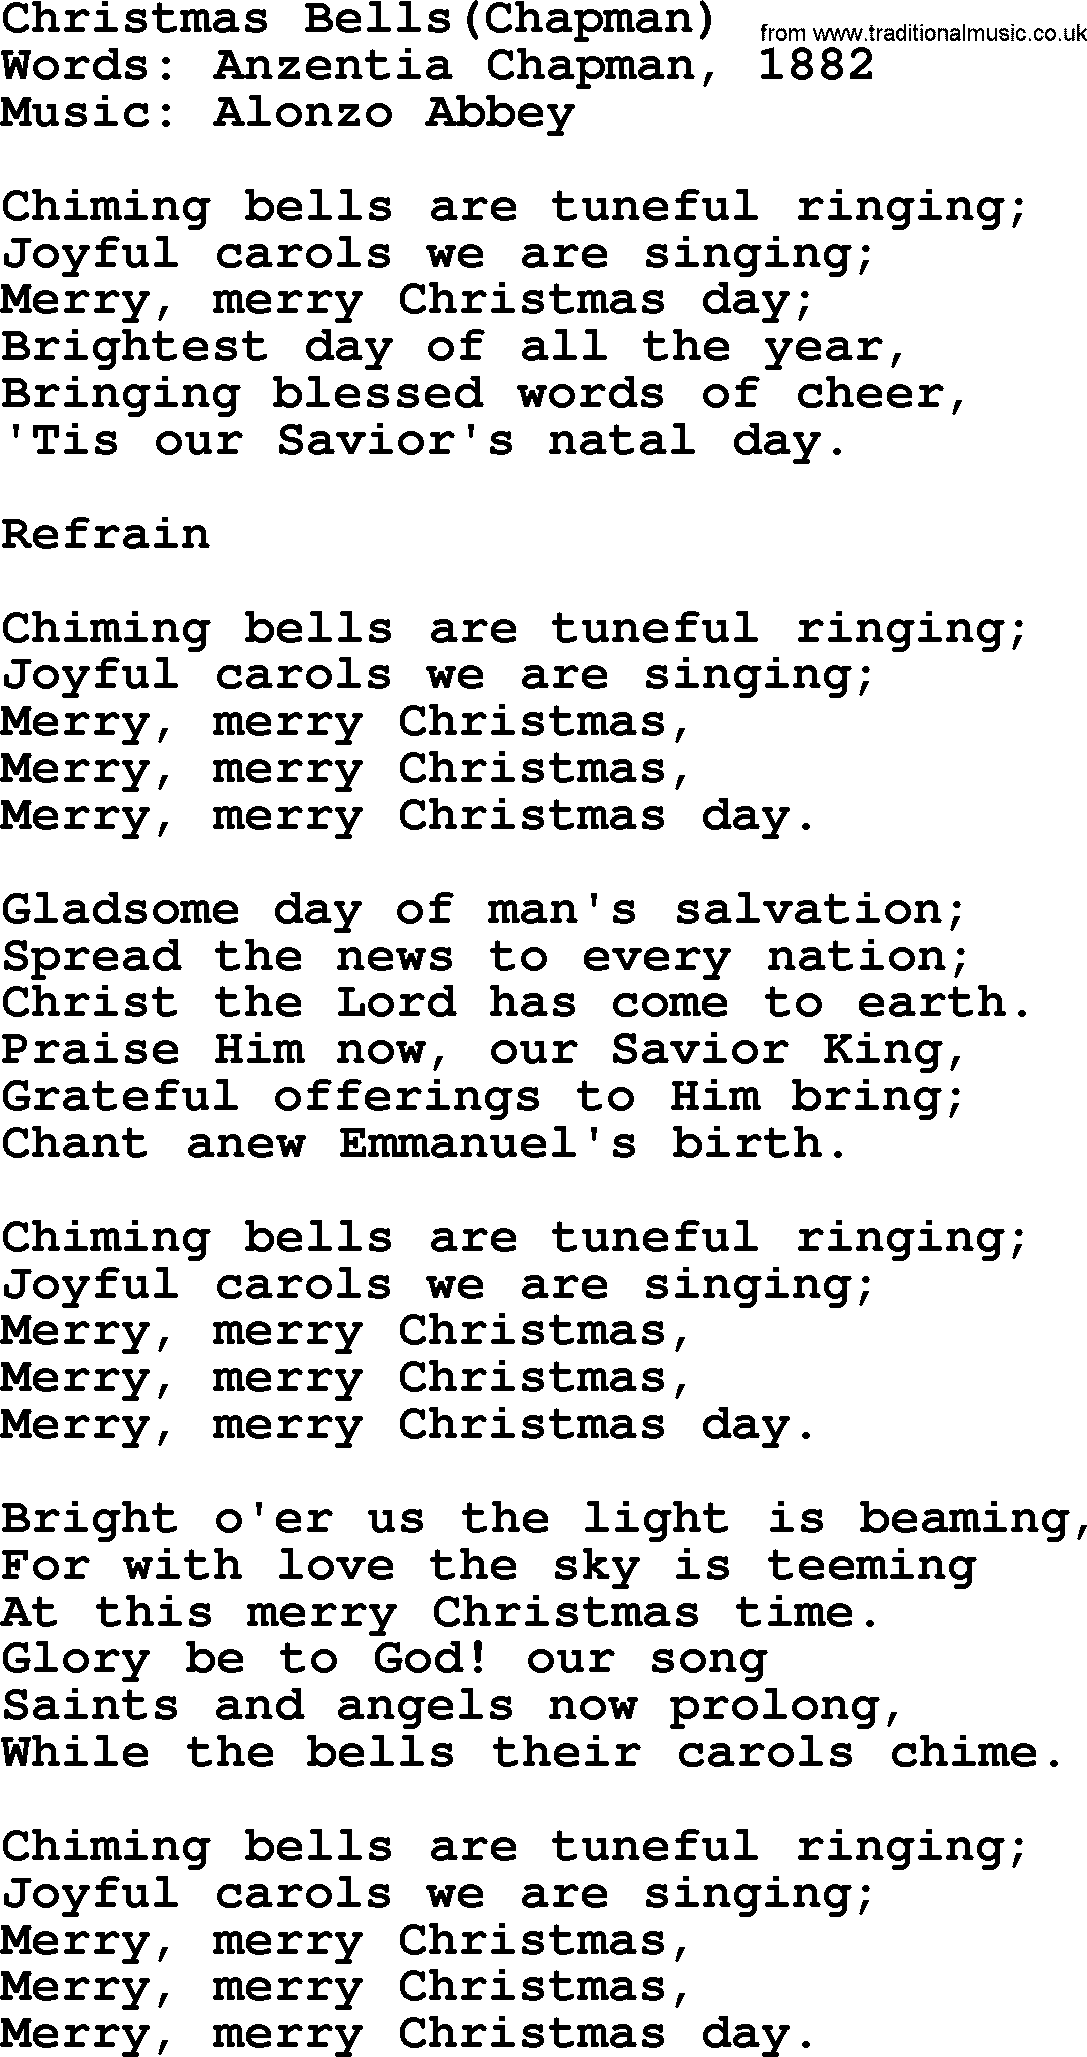 280 Christmas Hymns and songs with PowerPoints and PDF, title: Christmas Bells(chapman), lyrics, PPT and PDF